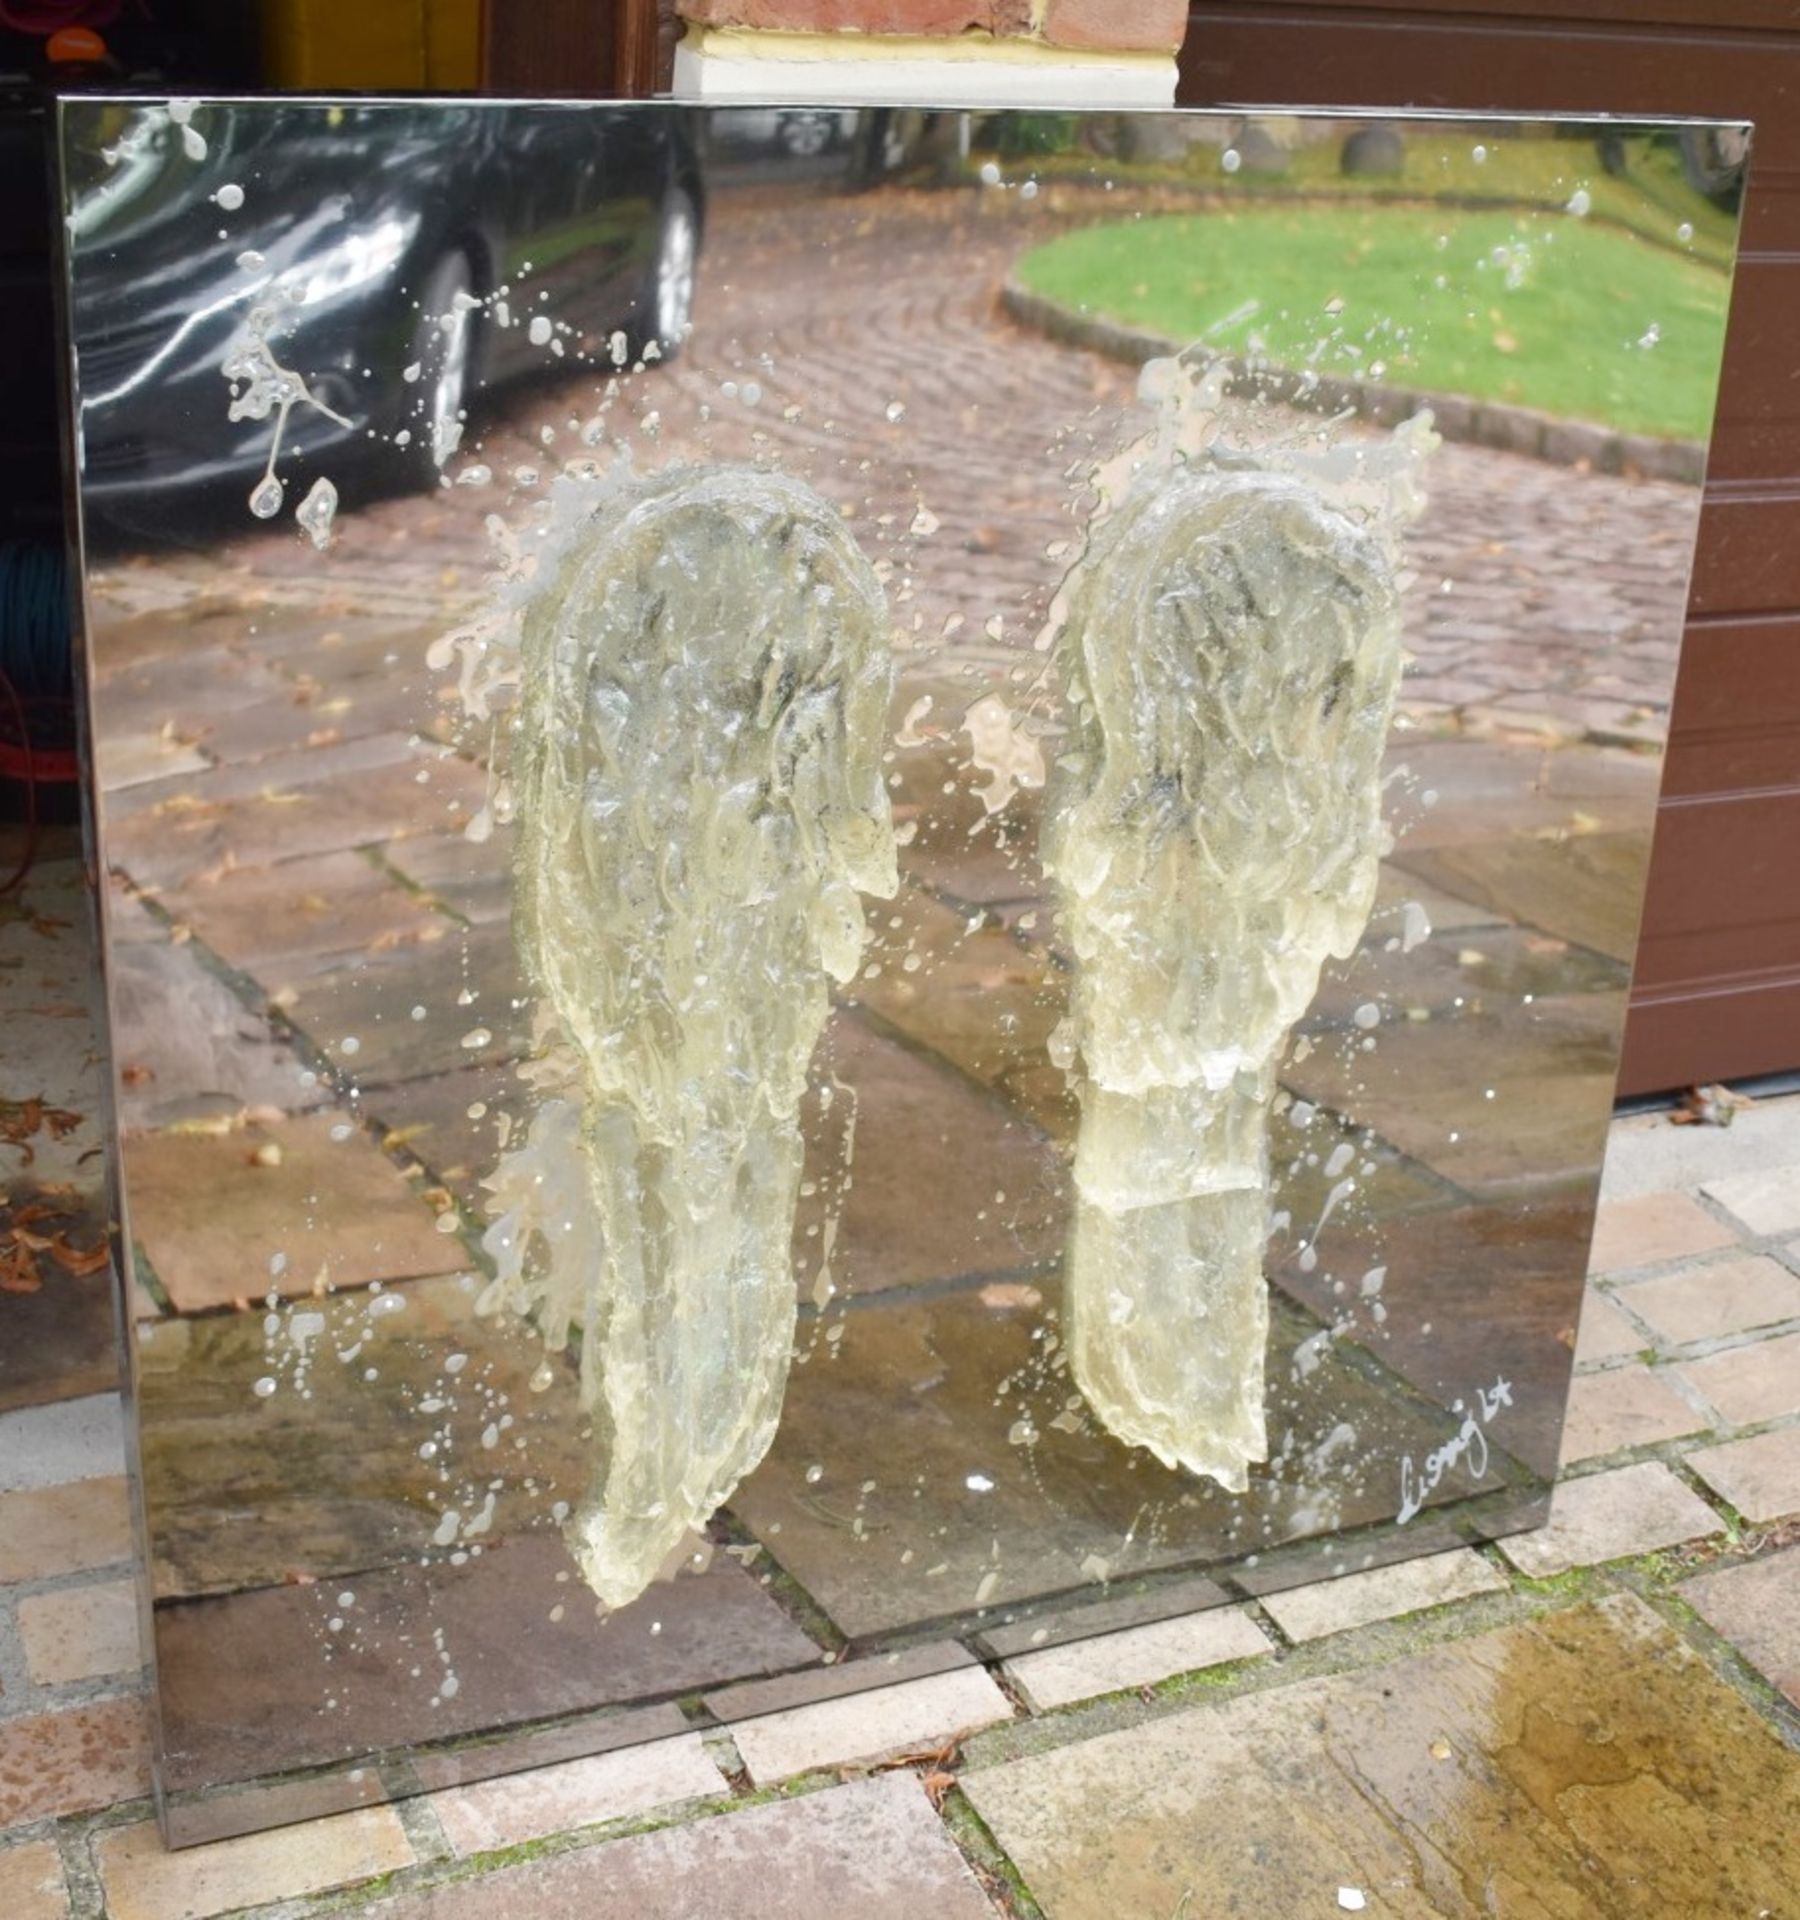 1 x Wall Mounted Sculptural Piece of Art - Angel Wings on Chrome Backdrop - Signed  by the